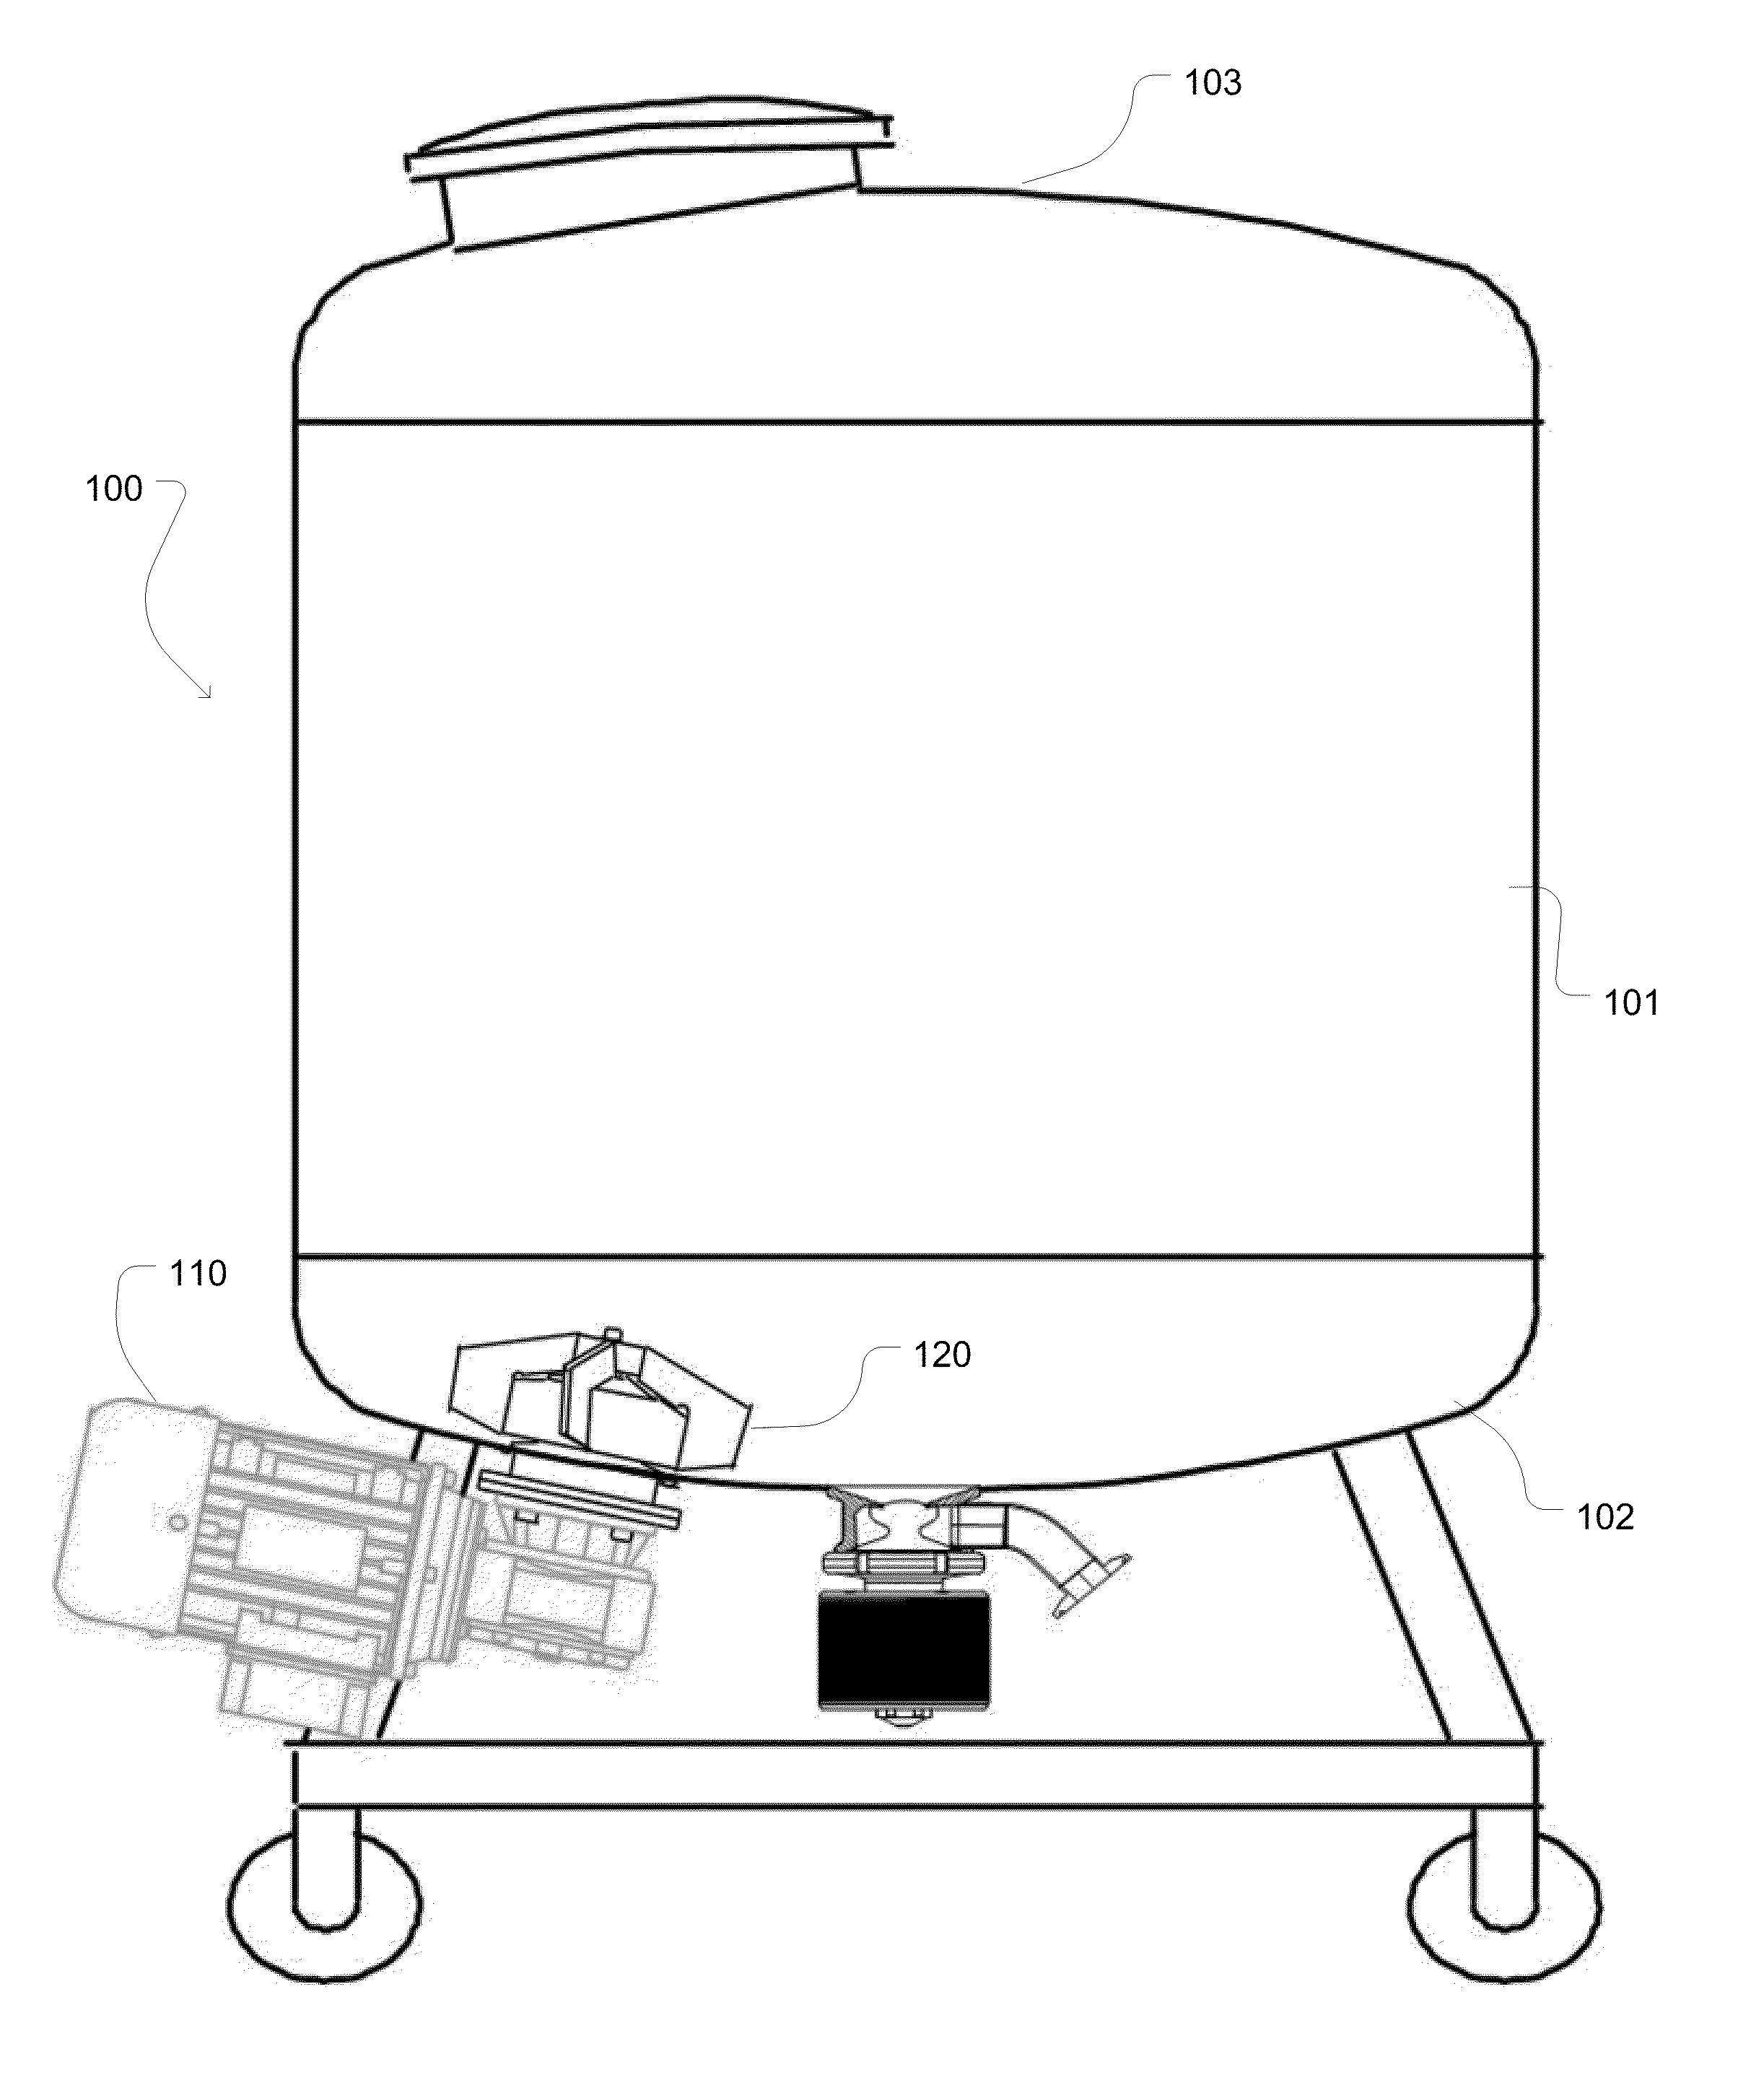 Method for scaling mixing operations